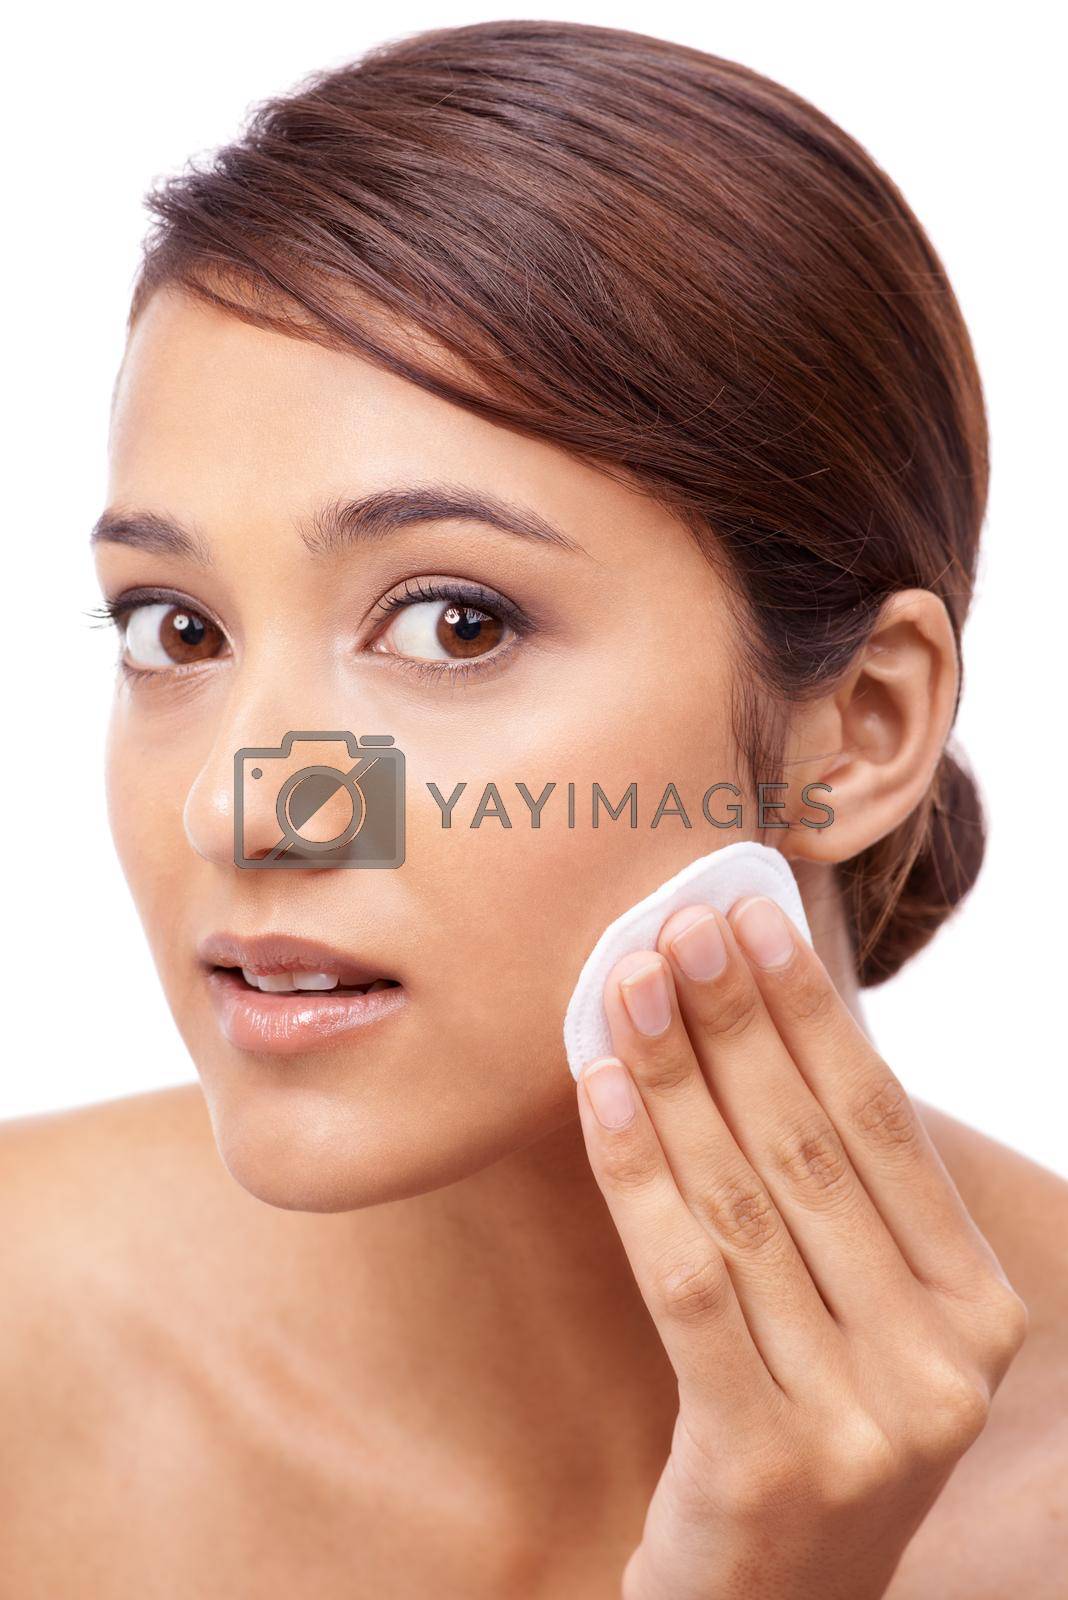 Royalty free image of Make sure you take off all your make-up before you go to bed. Portrait of a beautiful young woman moisturizing her face. by YuriArcurs